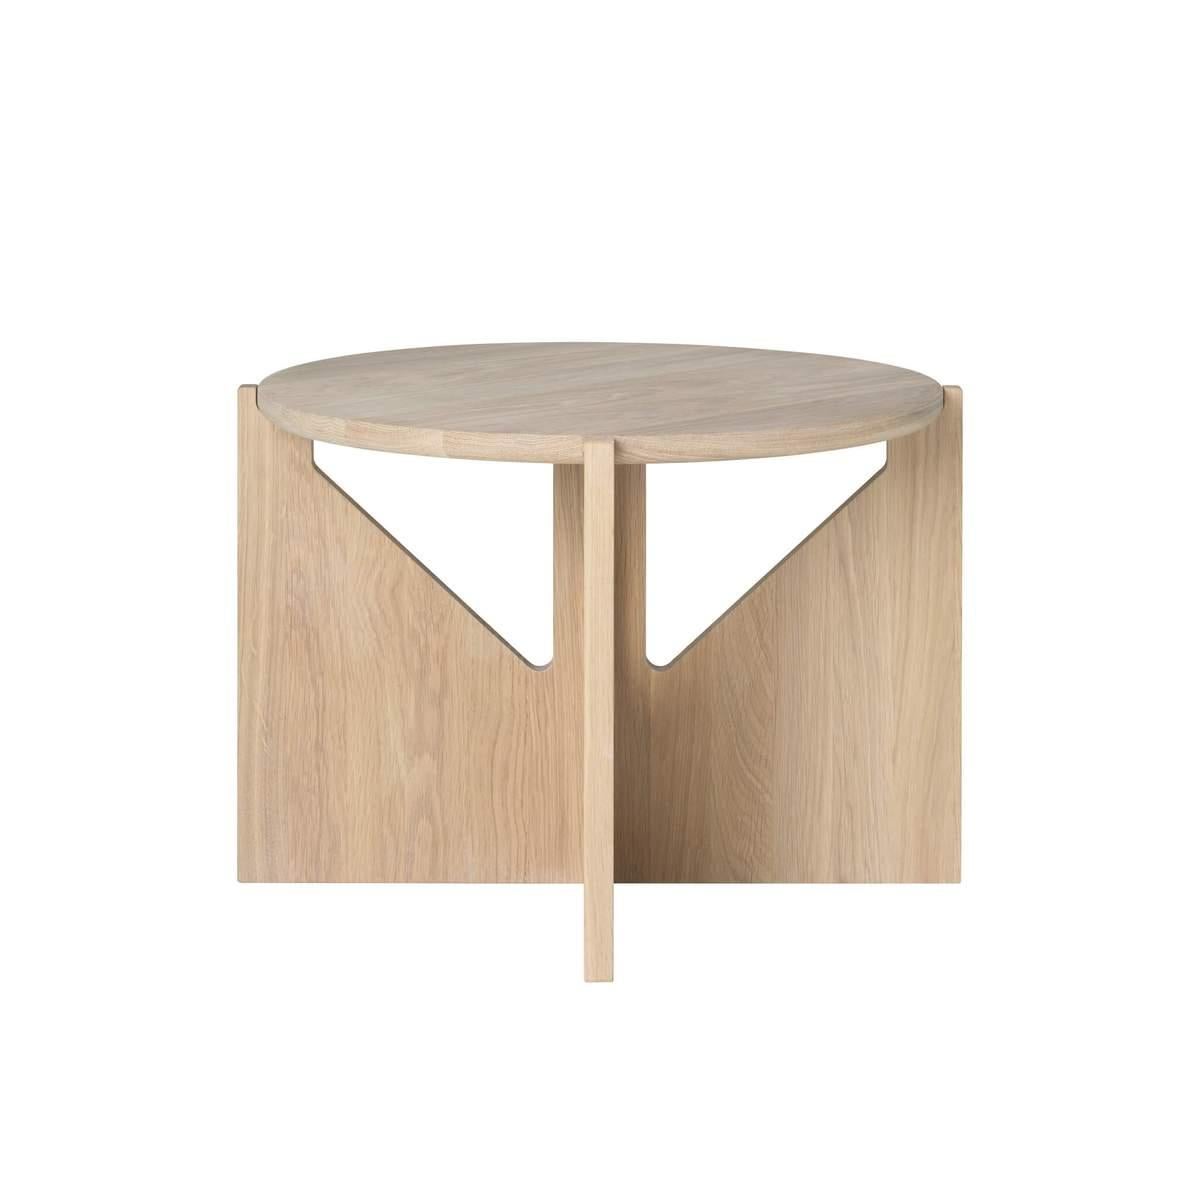 Oak table by Kristina Dam Studio
Materials: Solid oak with oil treatment.
Also available in other colors sizes. 
Dimensions: 52 x 52 x H 36cm.

A stunning danish designed coffee table from Kristina Dam Design Studio. The table is based on the